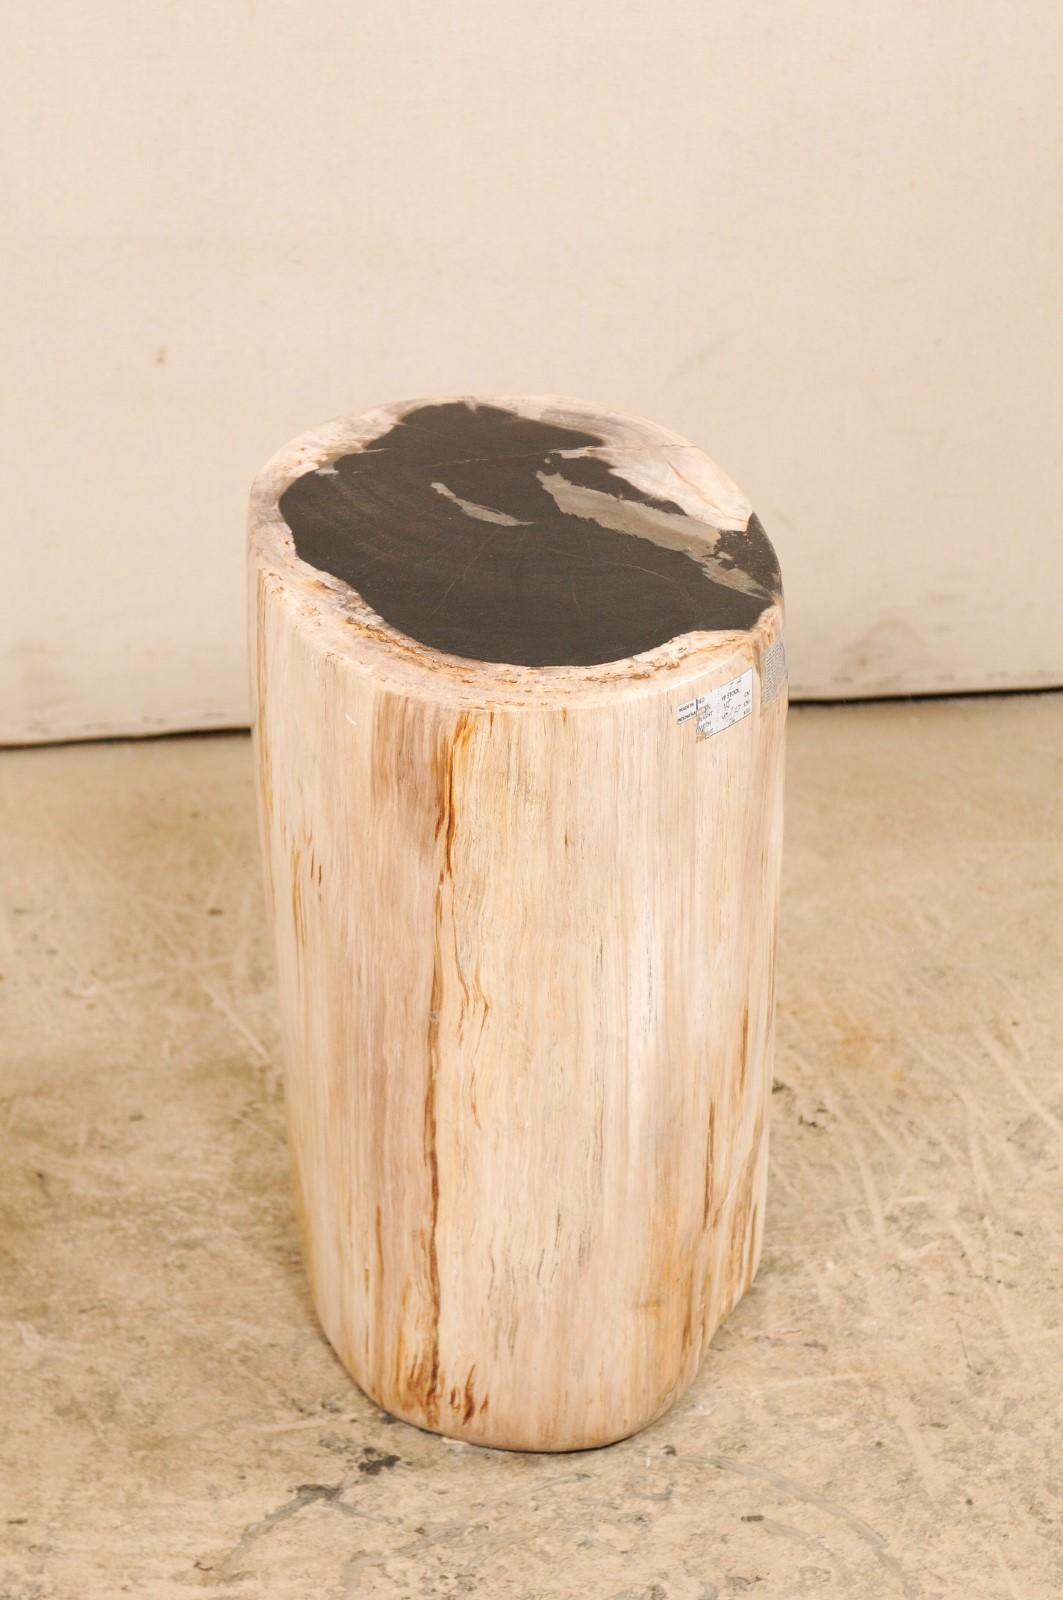 Contemporary Pair of Petrified Wood Stools or Pedestal Tables with Black Tops & Light Sides